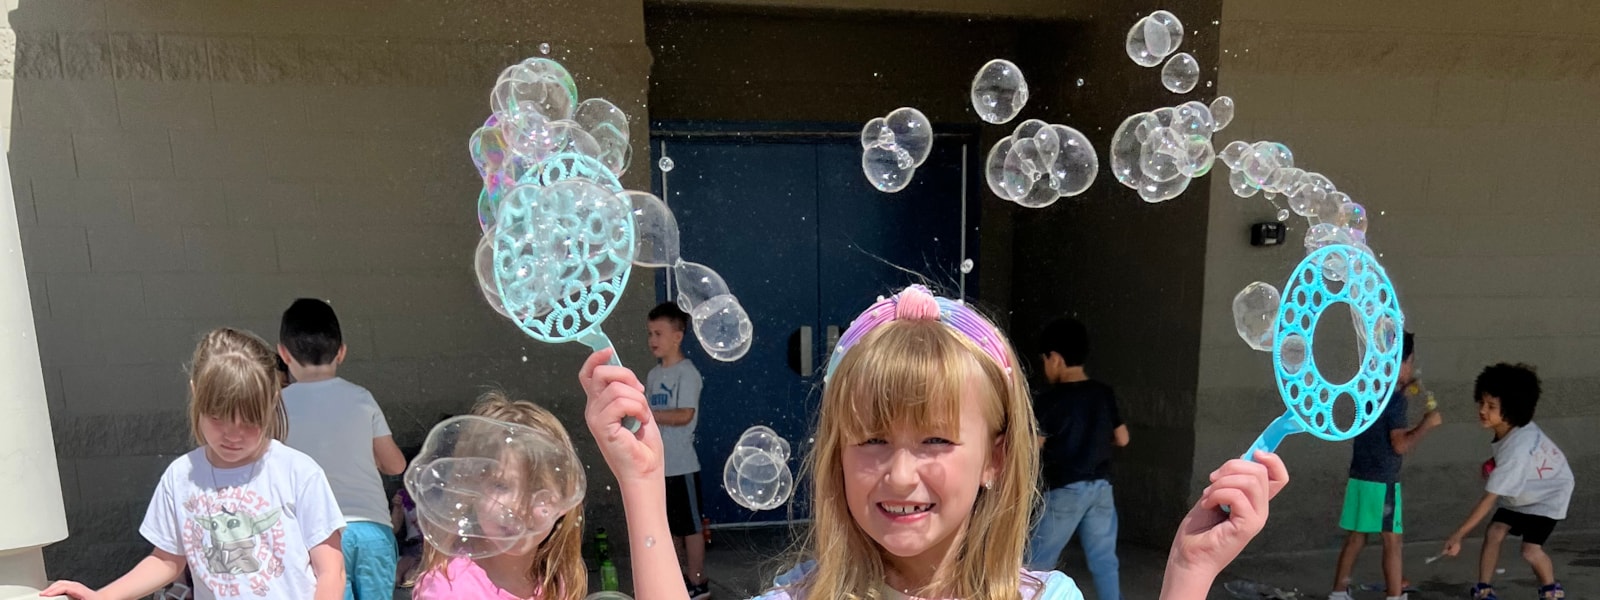 Students playing with bubbles